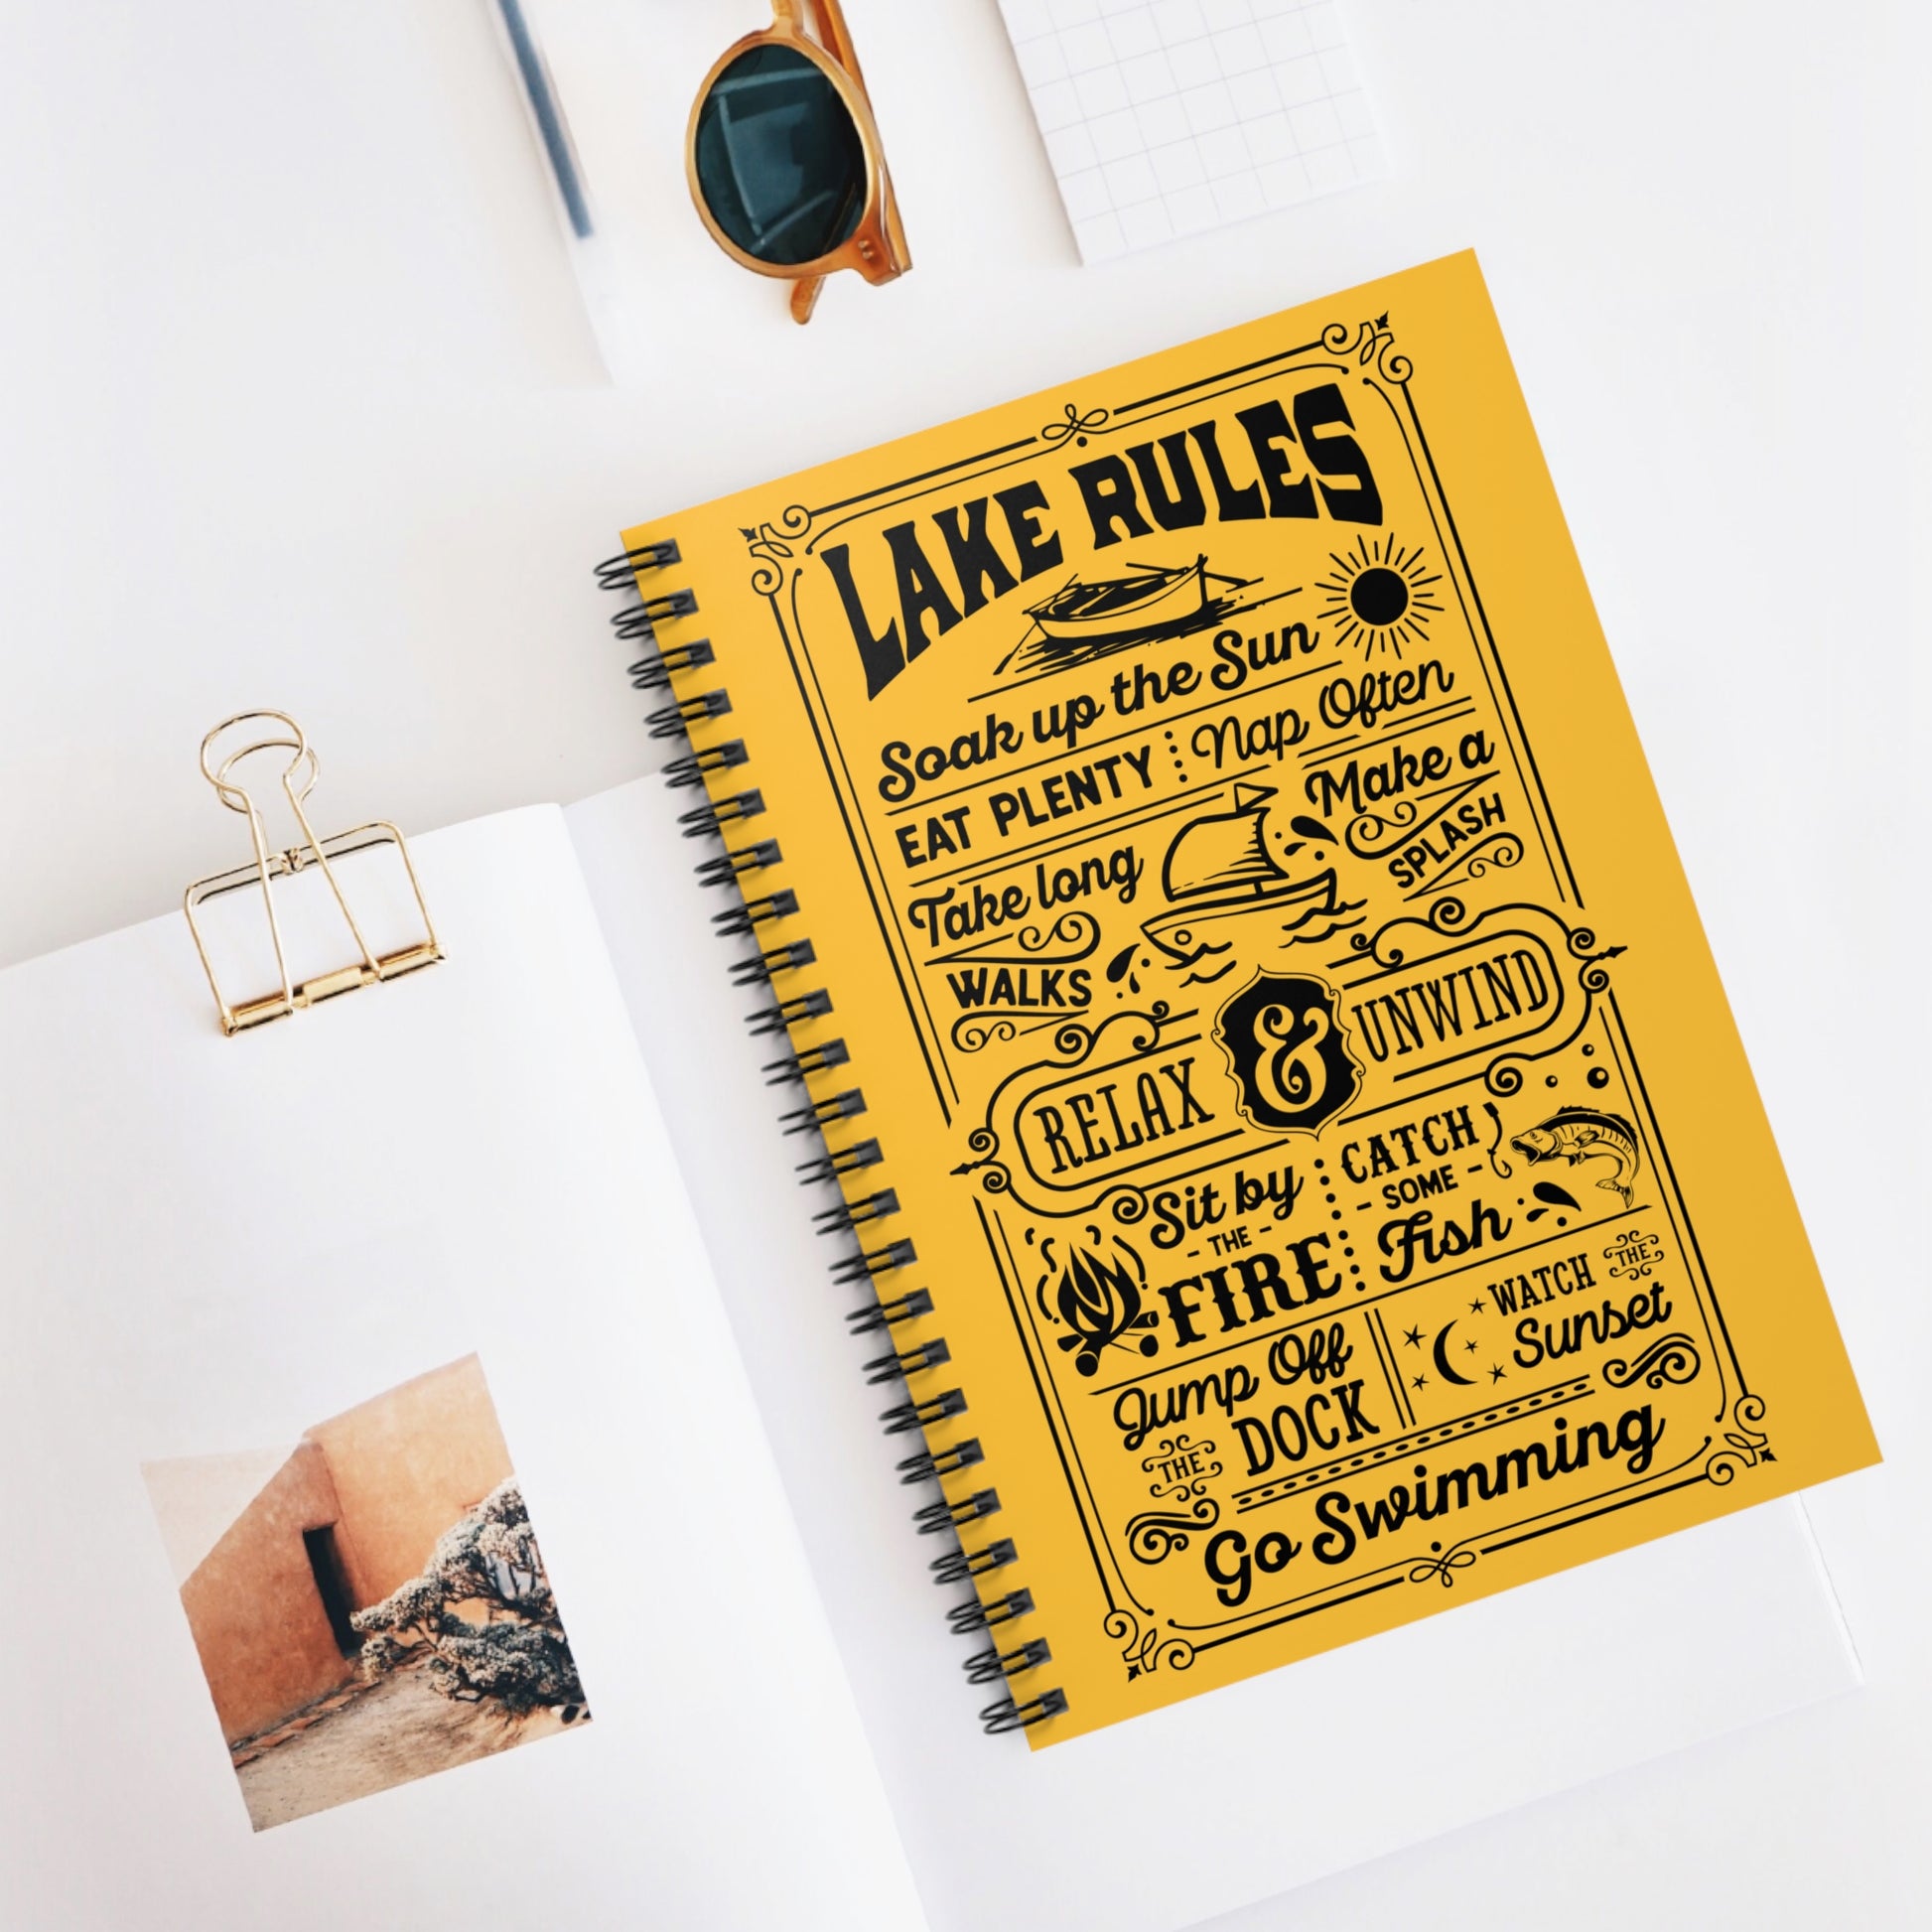 Lake Rules: Spiral Notebook - Log Books - Journals - Diaries - and More Custom Printed by TheGlassyLass.com